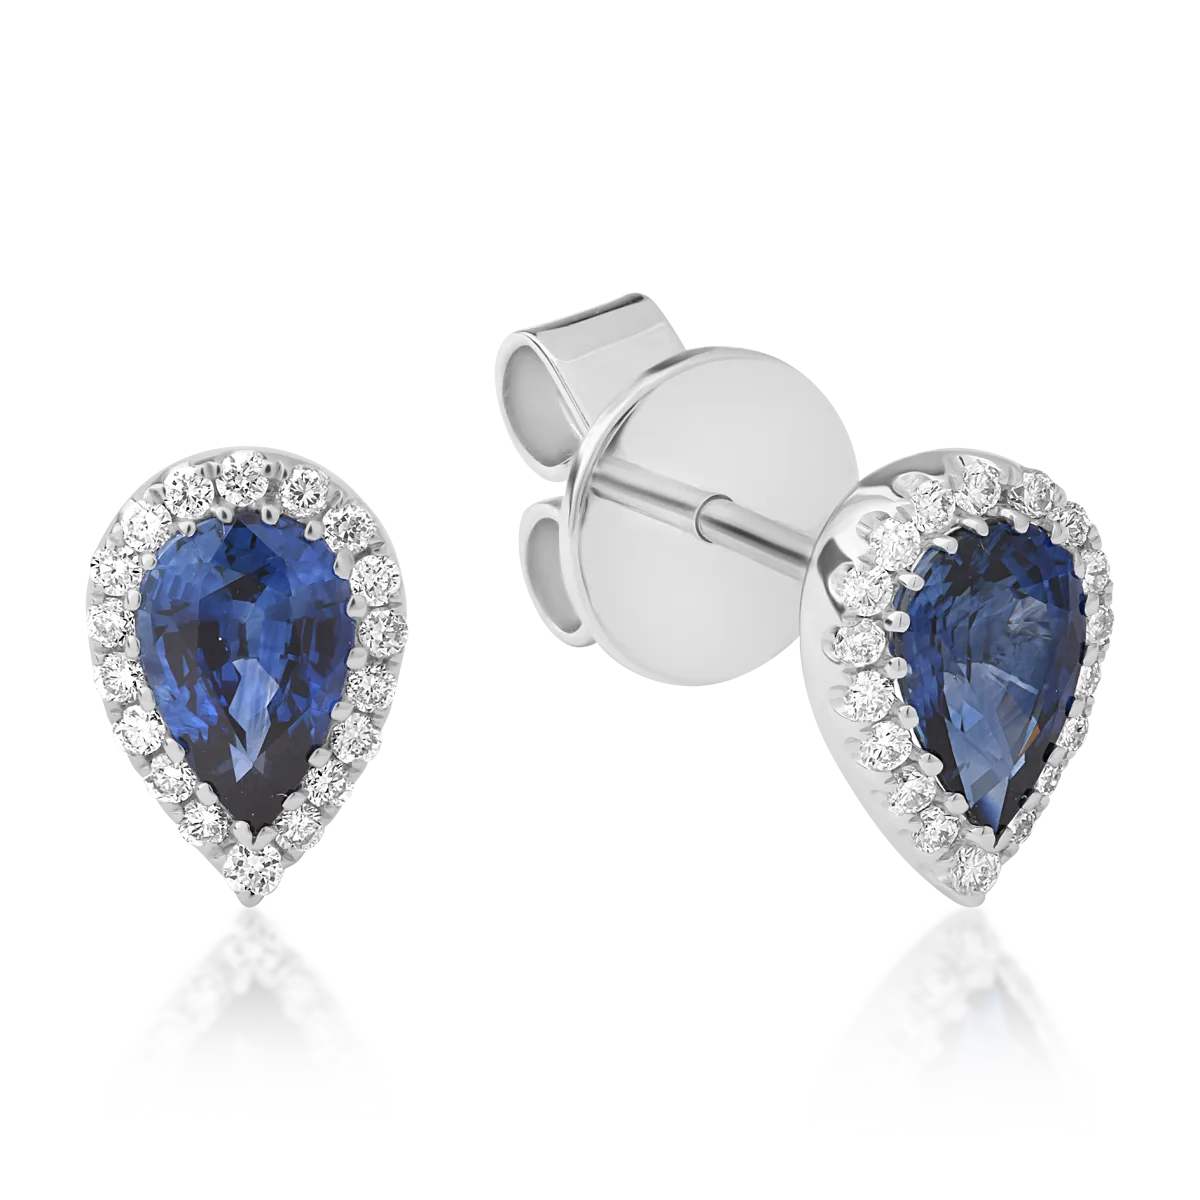 18K white gold earrings with sapphires of 0.77ct and diamonds of 0.14ct